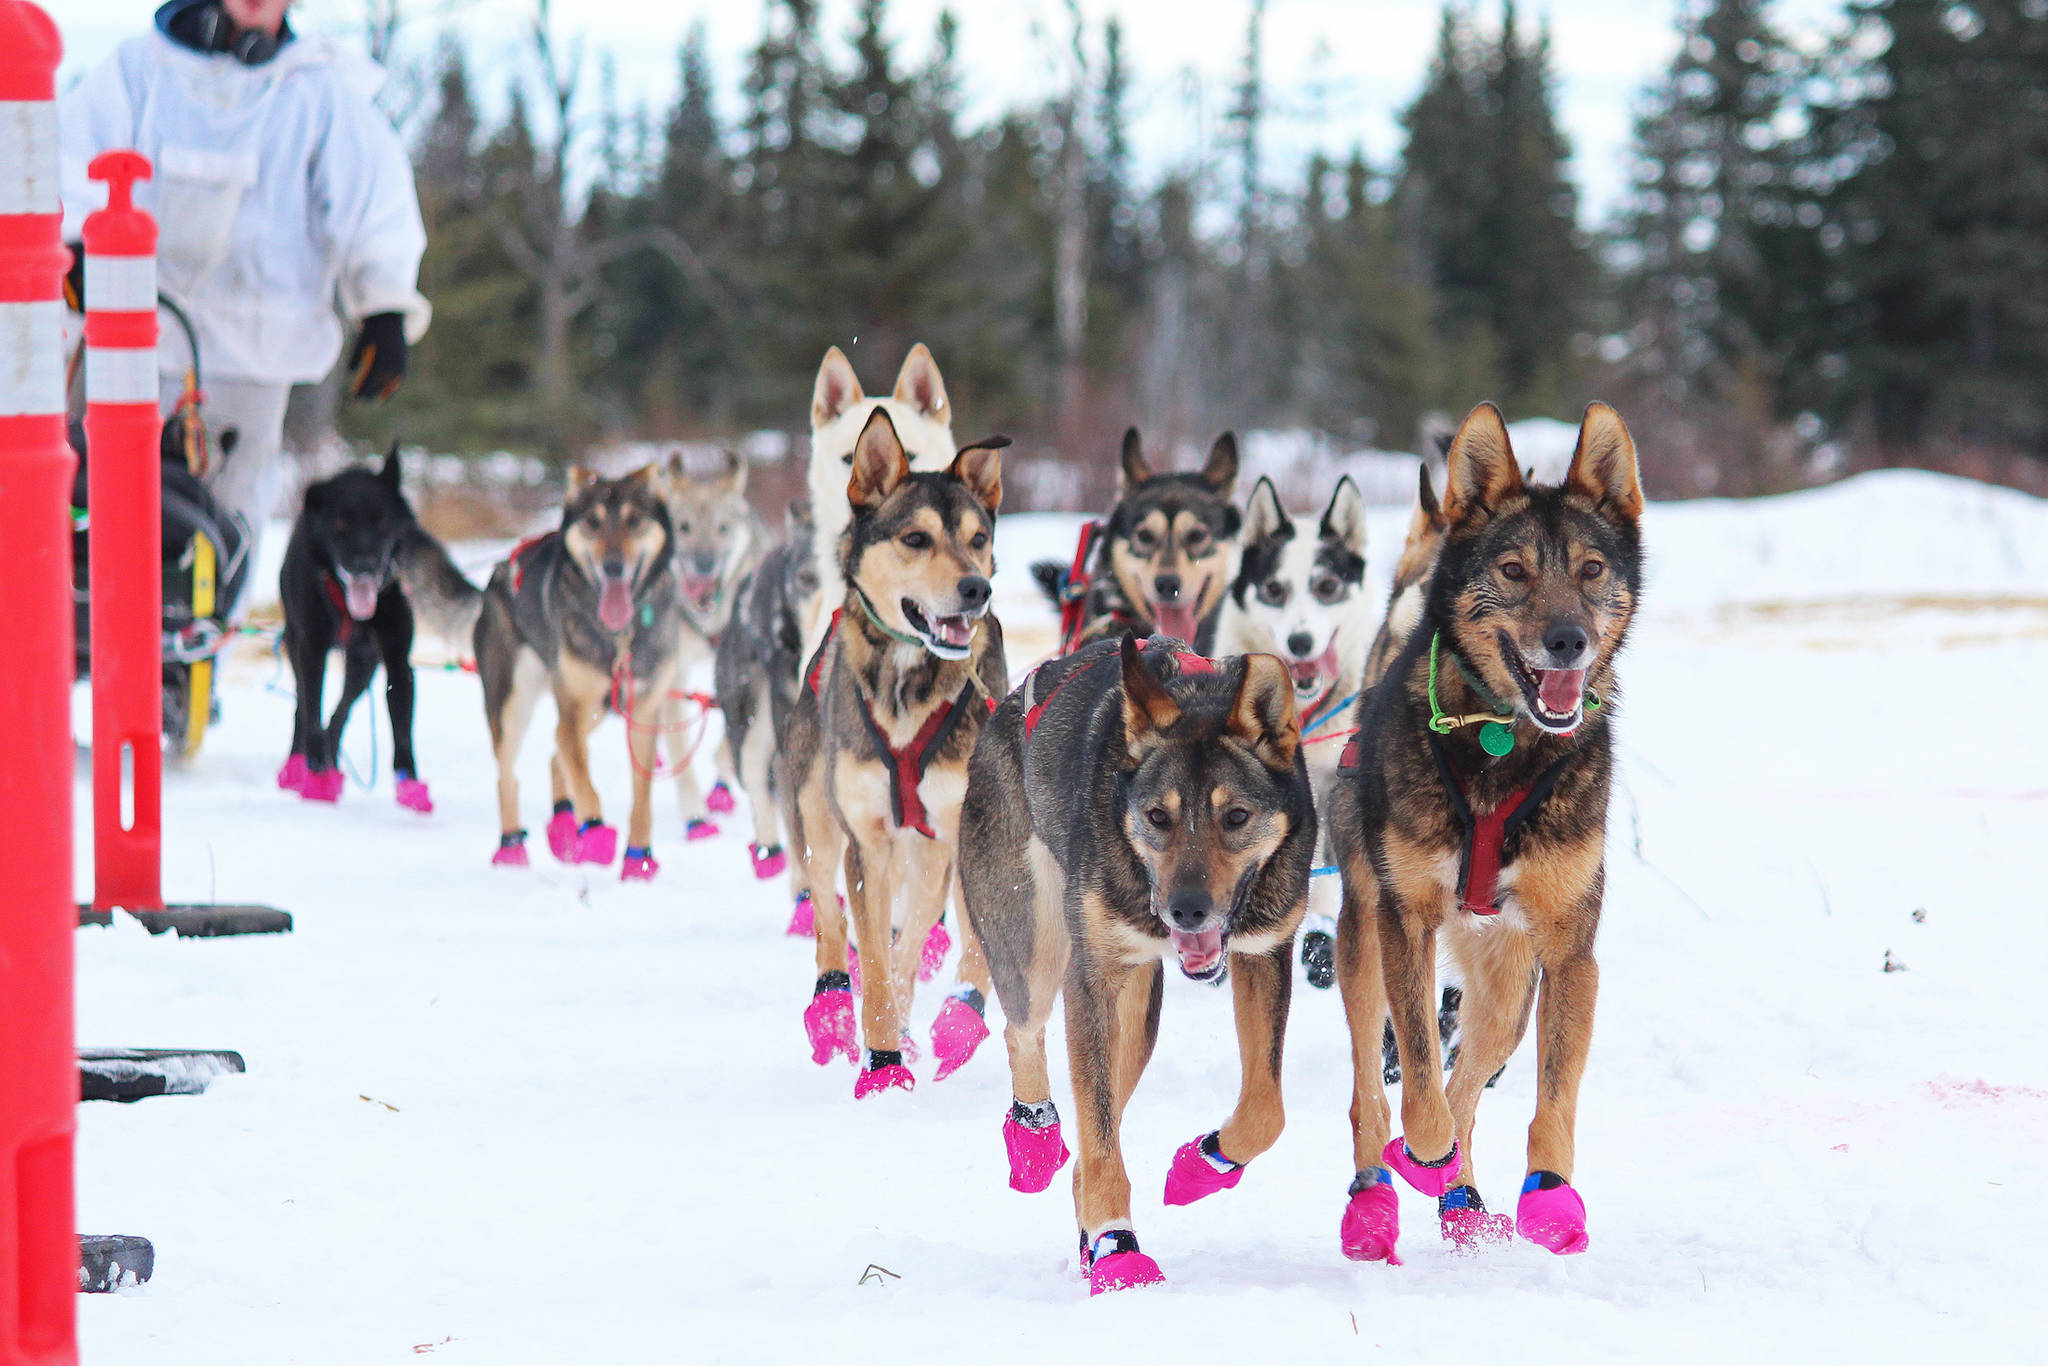 Travis Beals’ dog team approaches the finish line of this year’s Tustumena 200 Sled Dog Race on Sunday, Jan. 27, 2019 at Freddie’s Roadhouse near Ninilchik, Alaska. Beals and his team came in fourth, finishing just four minutes behind third place winner Nic Petit. (Photo by Megan Pacer/Homer News)